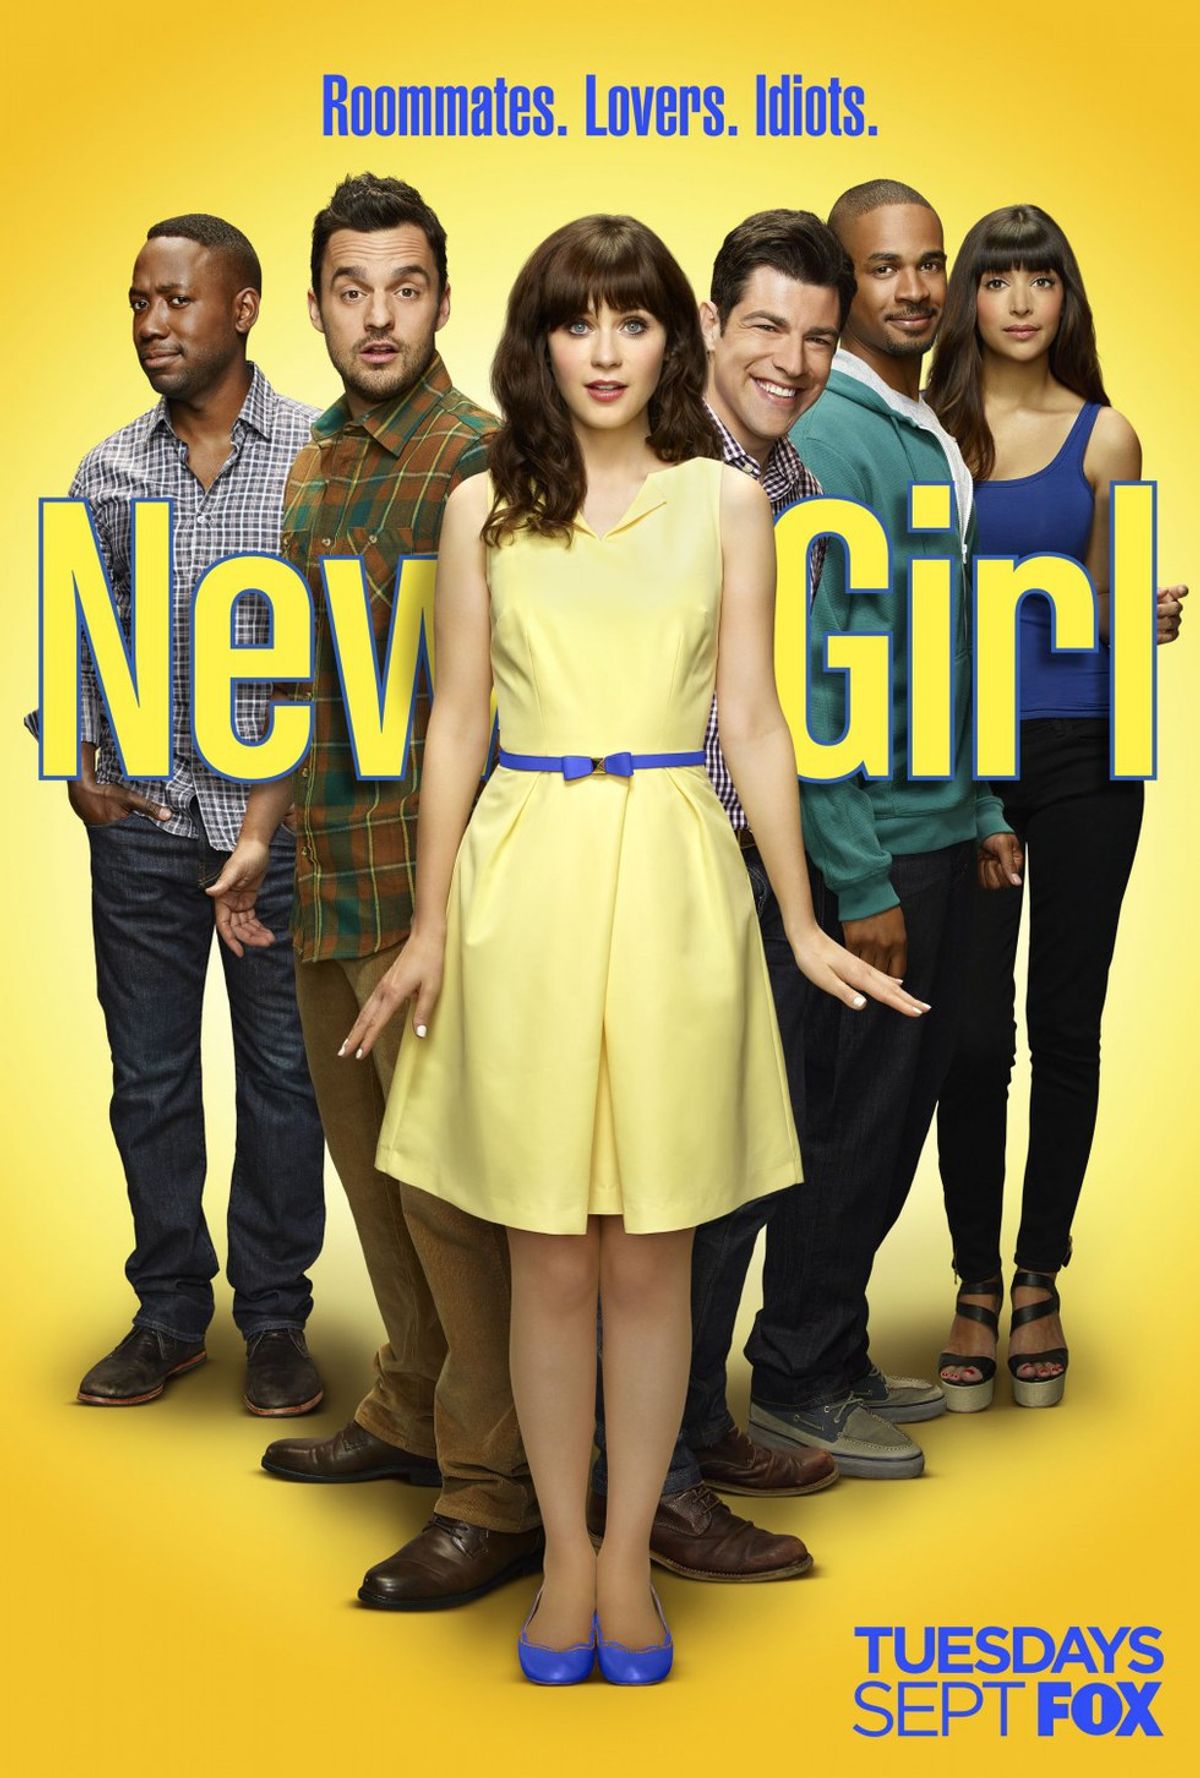 College Struggles As Told By The Cast Of 'New Girl'